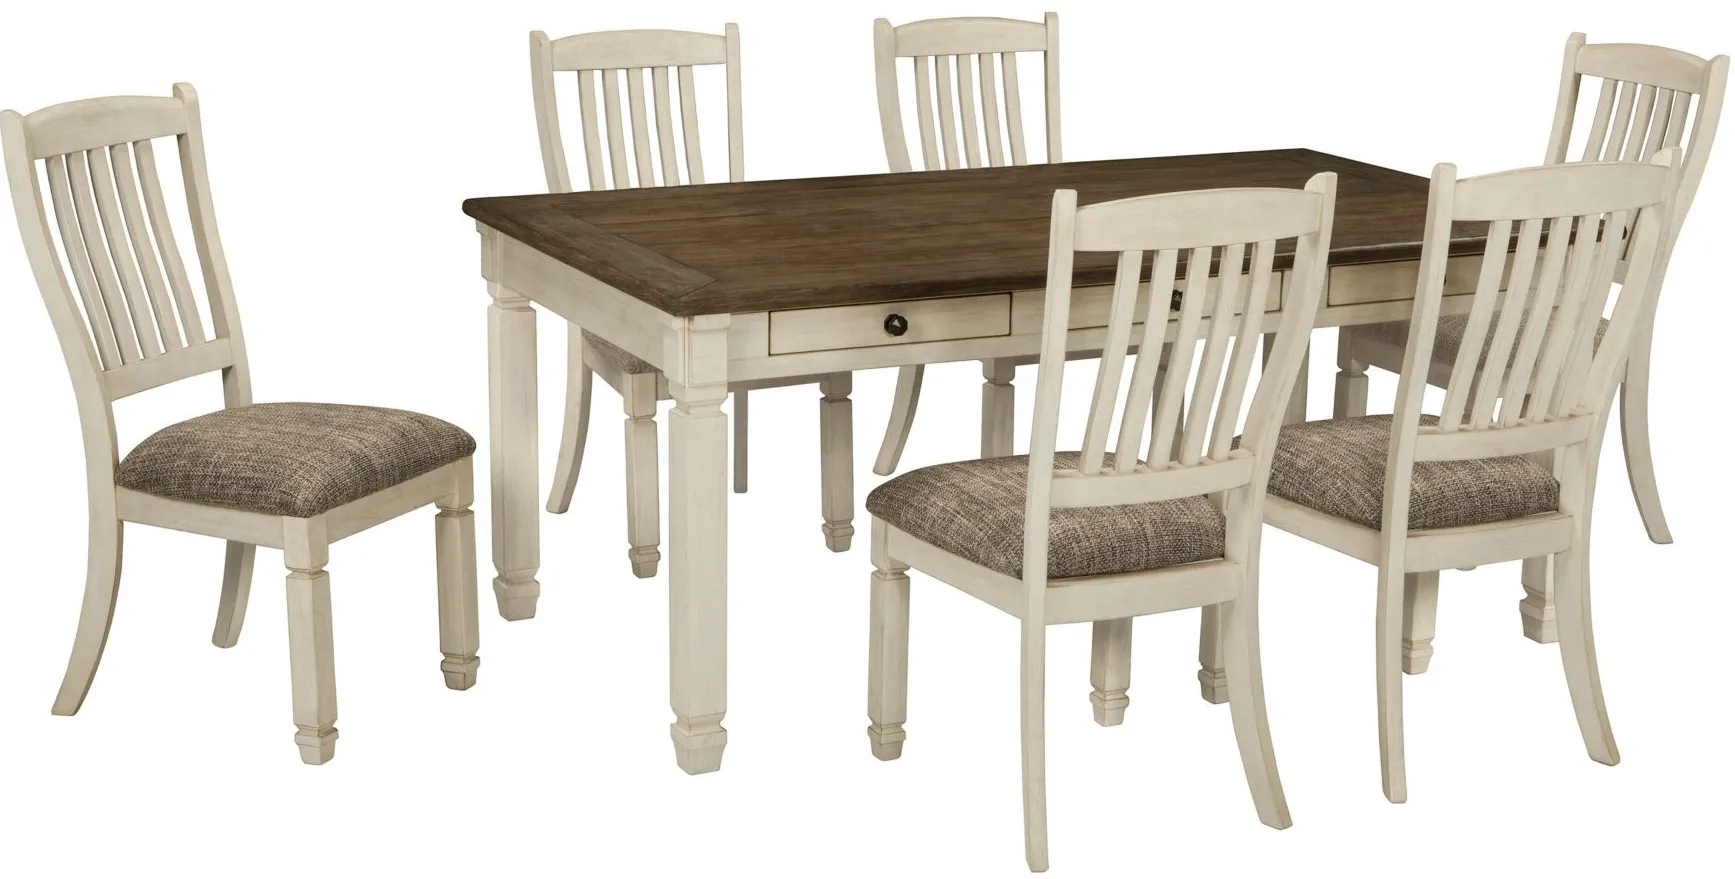 Aspen 7-pc. Dining Set in Light Brown / Antique White by Ashley Furniture